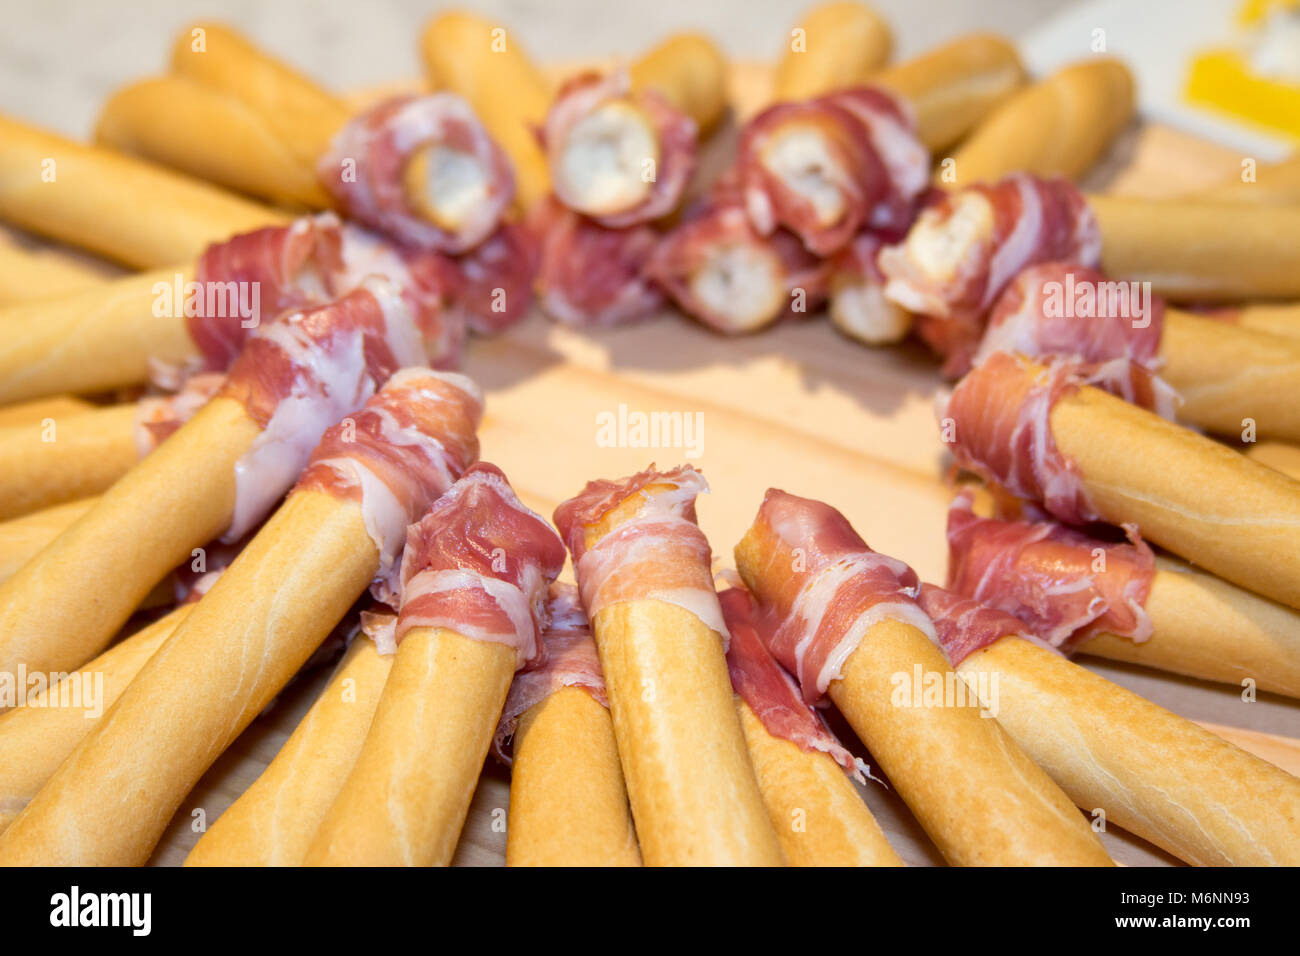 ham typical Italian dishes and products traditional Italian cuisine Stock Photo